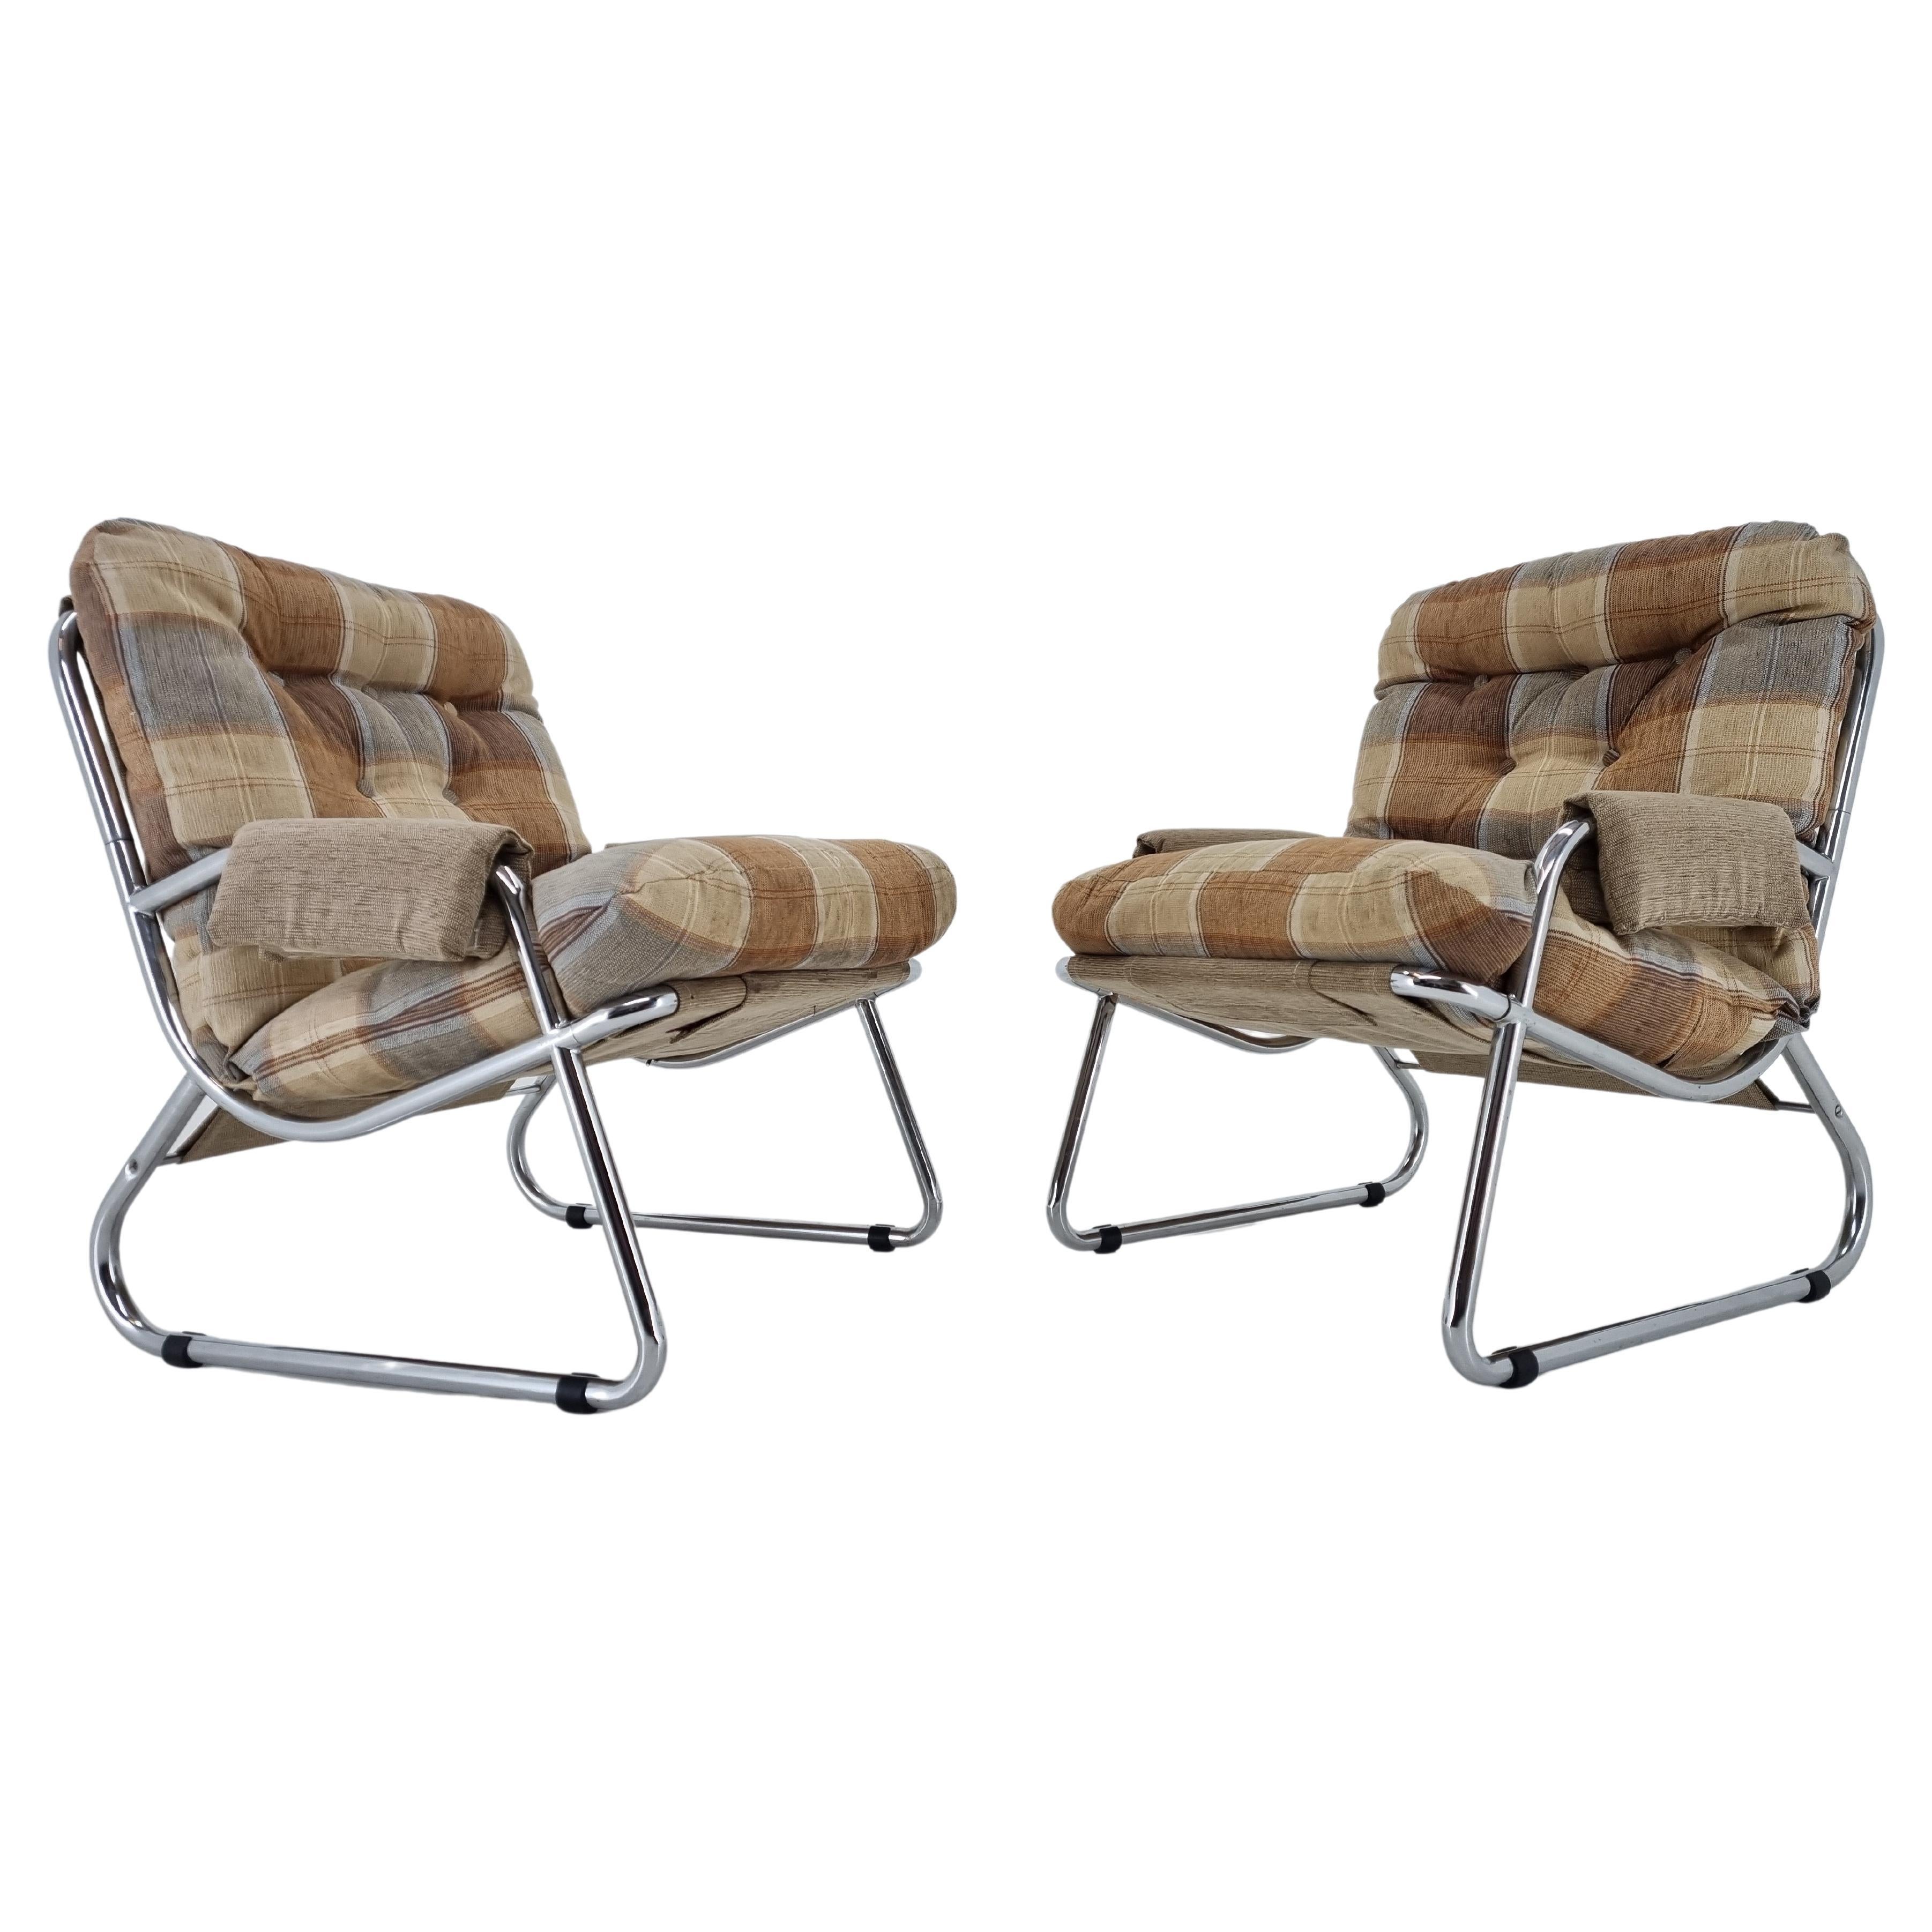 Pair of Mid Century Armchairs, Peter Hoyte, 1970s For Sale